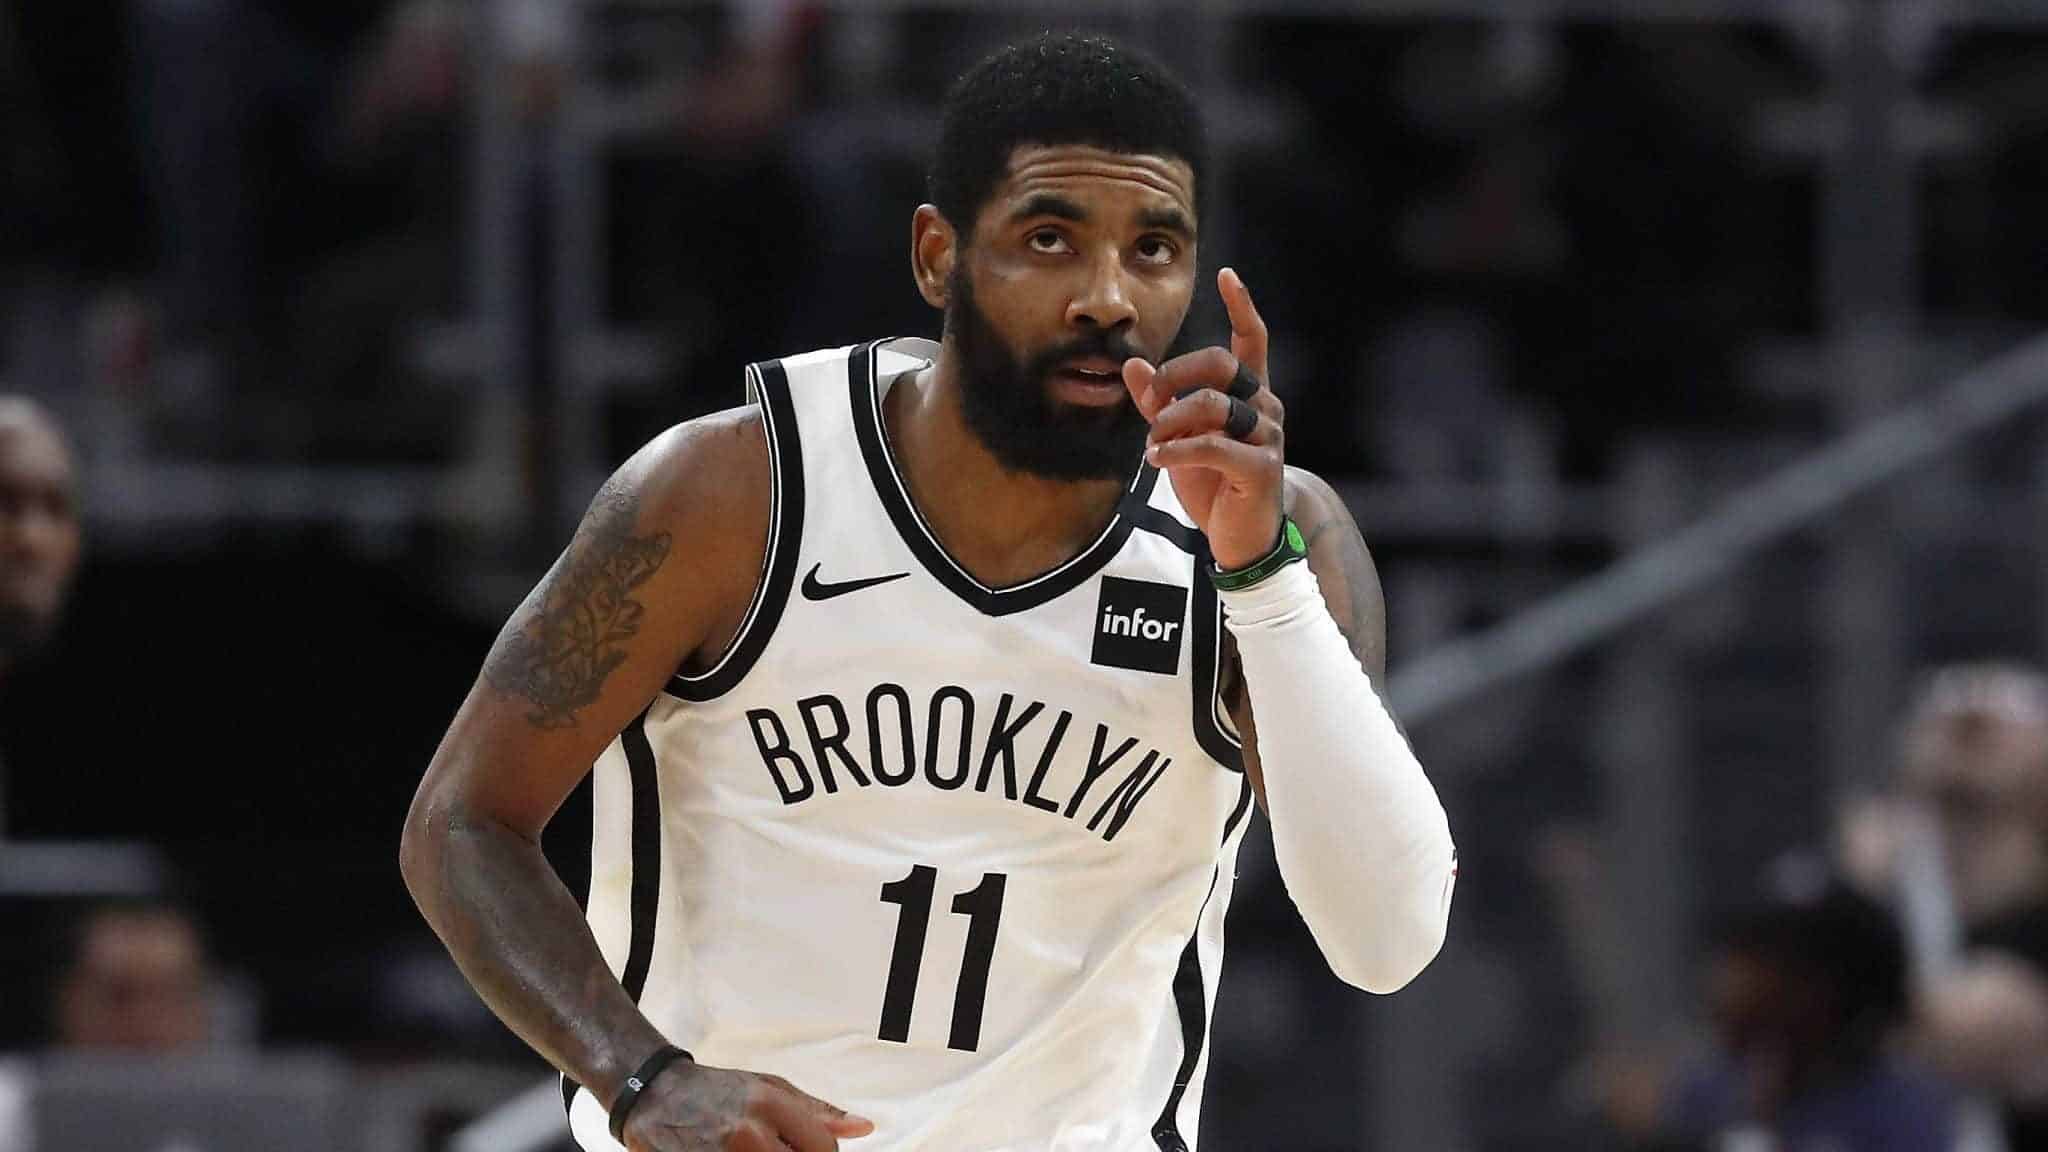 Kyrie Irving's maligned season in Brooklyn hit a high note on Saturday.